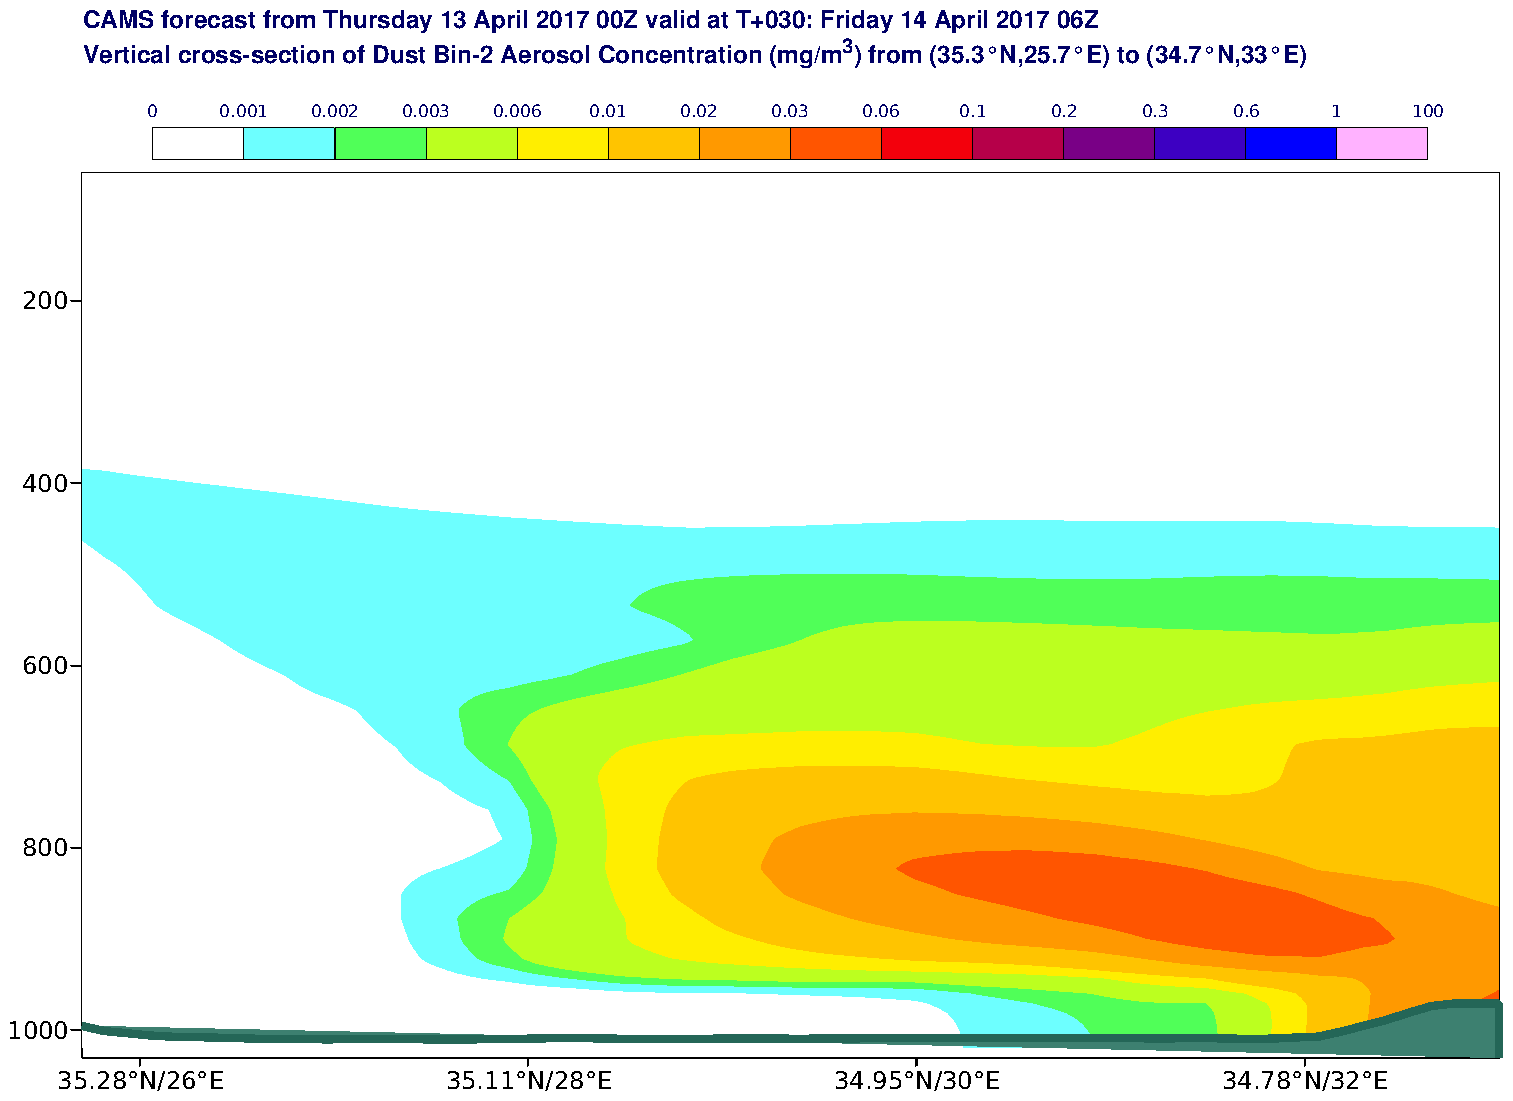 Vertical cross-section of Dust Bin-2 Aerosol Concentration (mg/m3) valid at T30 - 2017-04-14 06:00